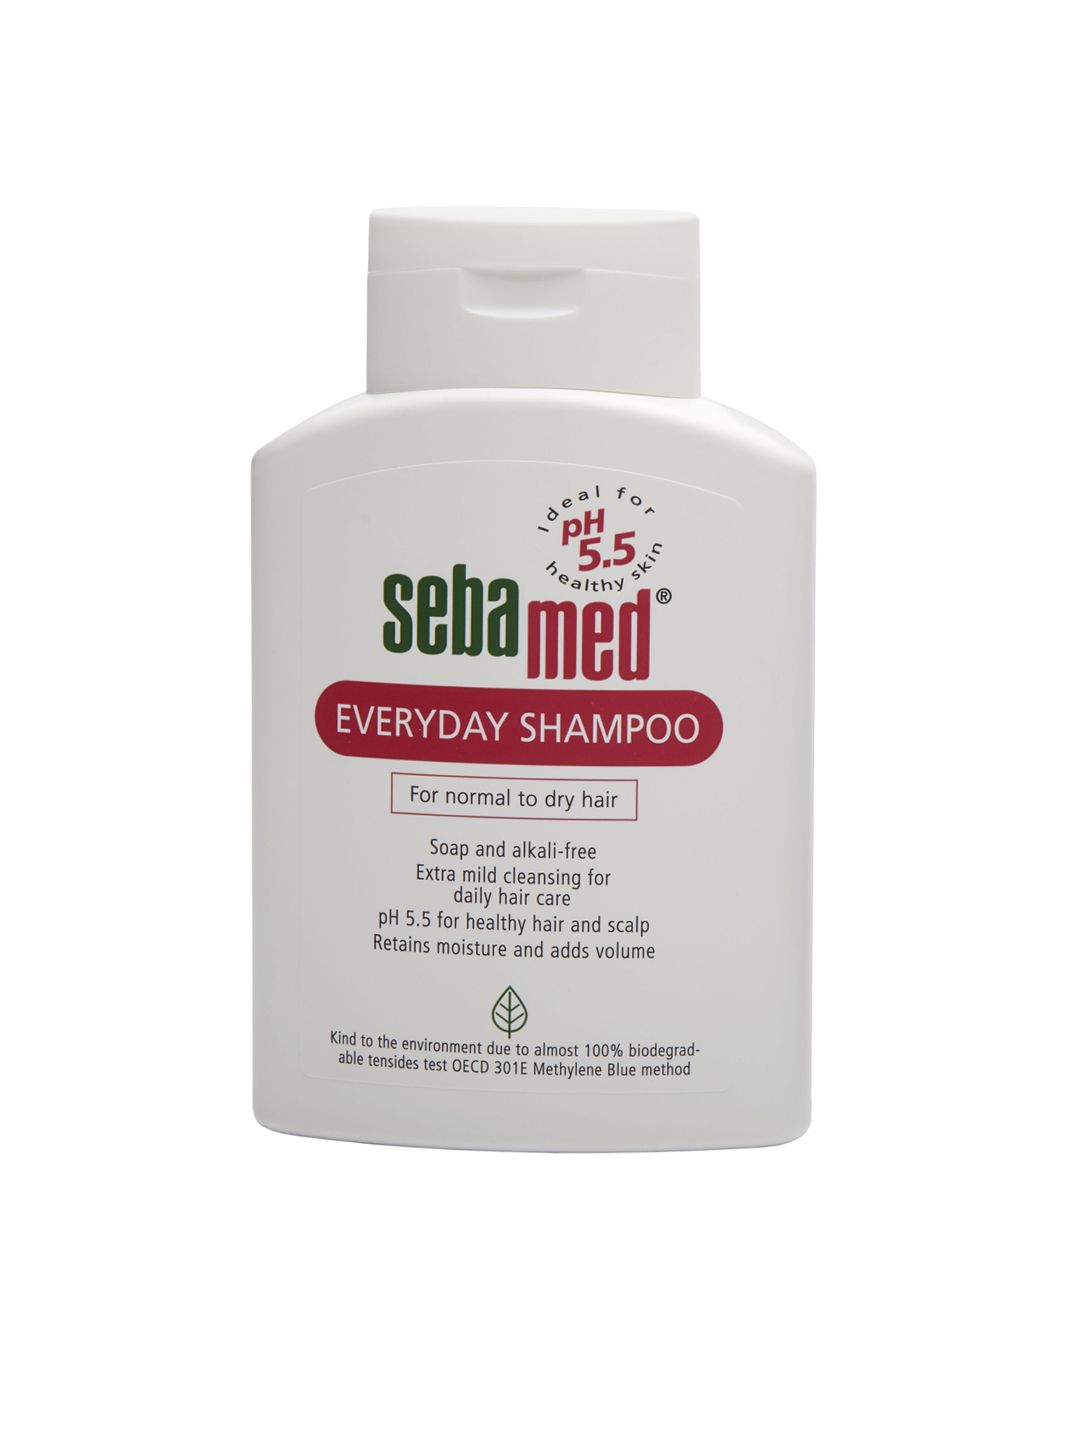 Sebamed Everyday Shampoo for Normal to Dry Hair 200 ml Price in India